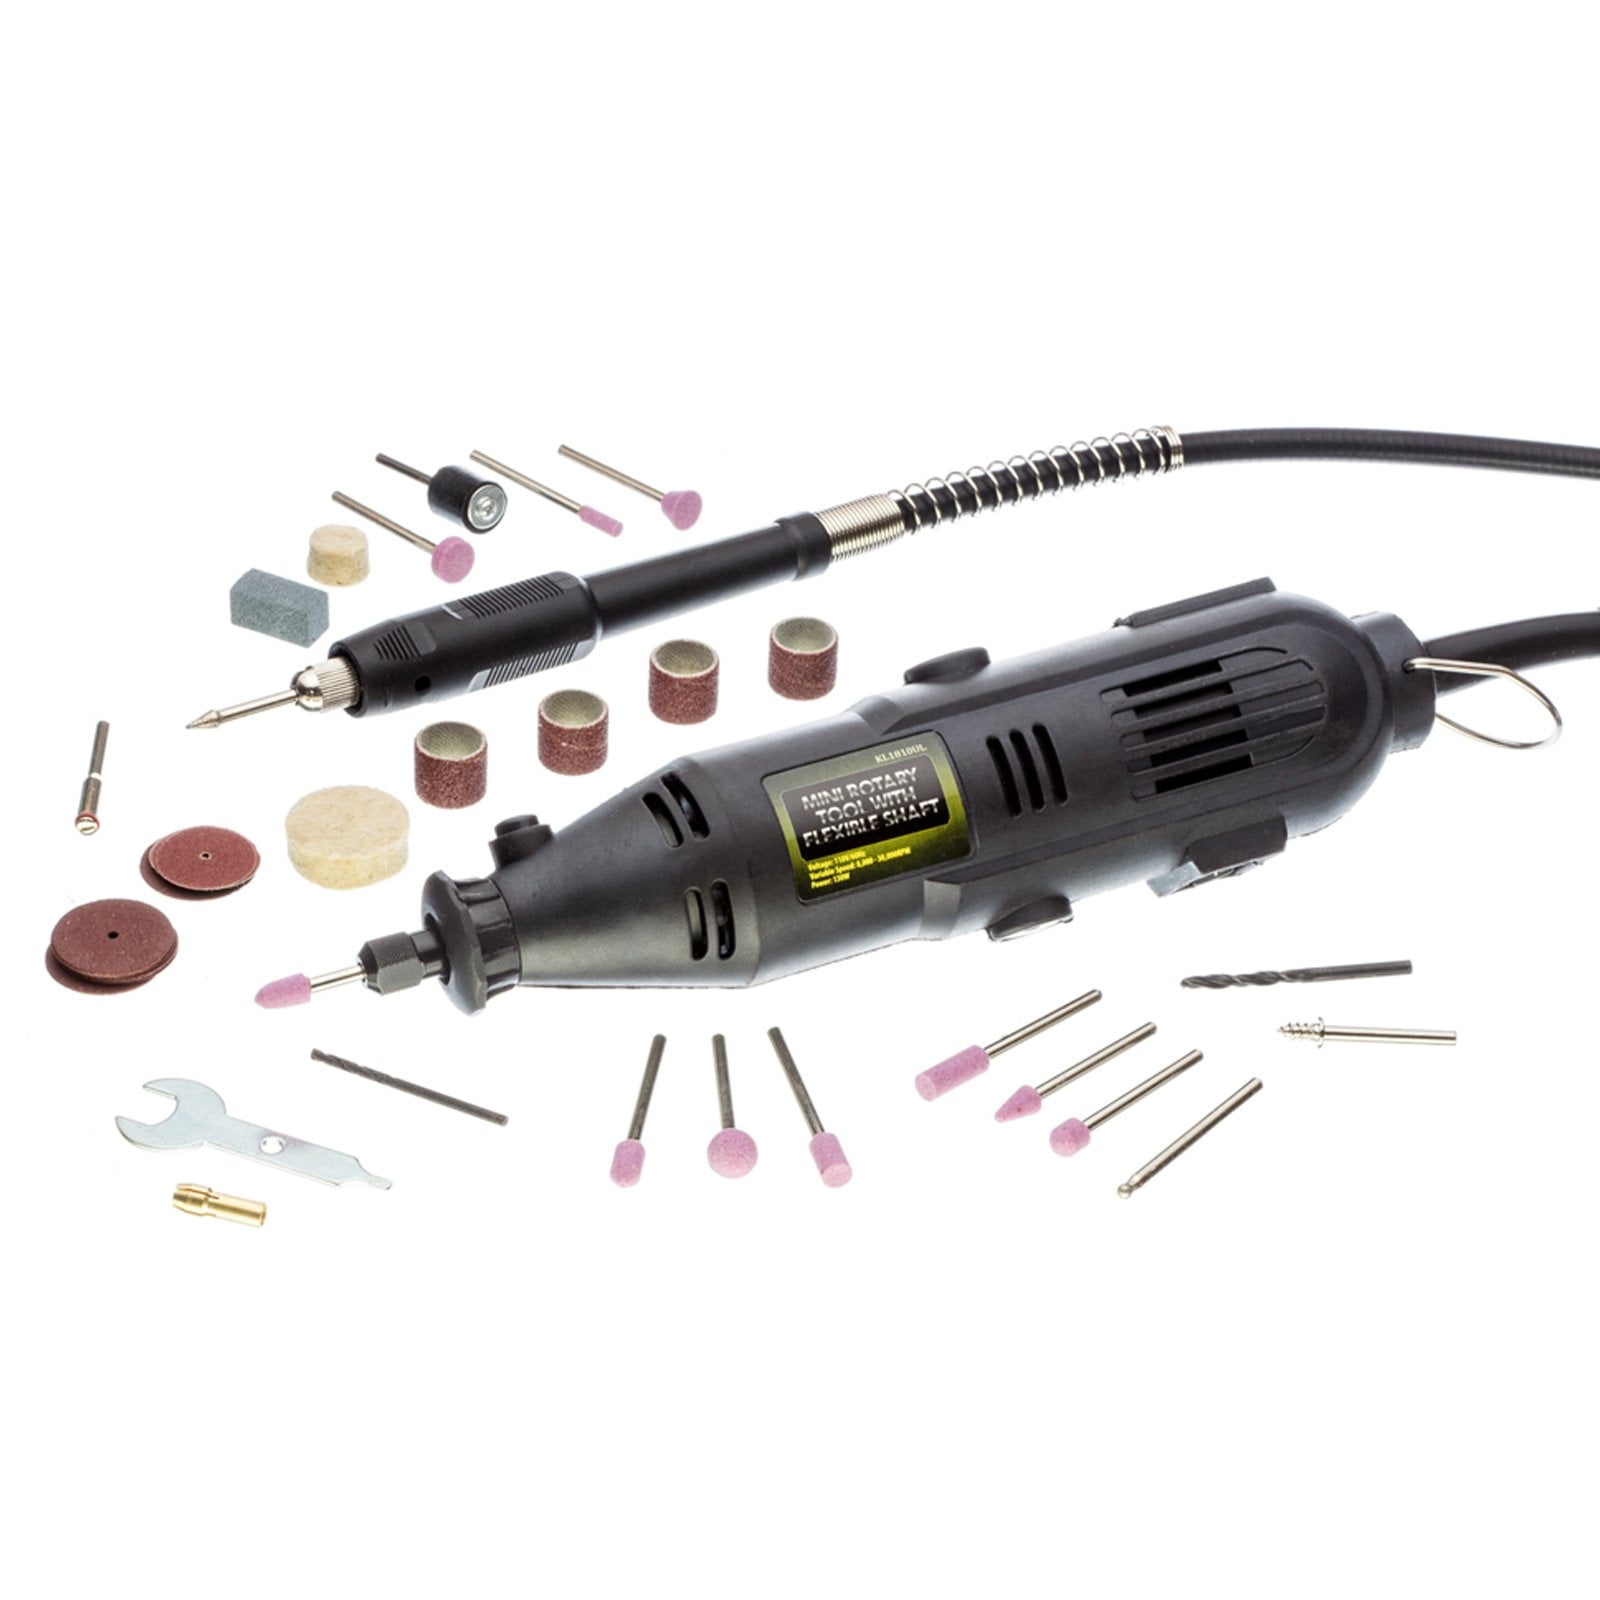 100 Pcs Rotary Tool Kit With Flex Shaft Wen 2305 Variable Speed Grinder Polisher 